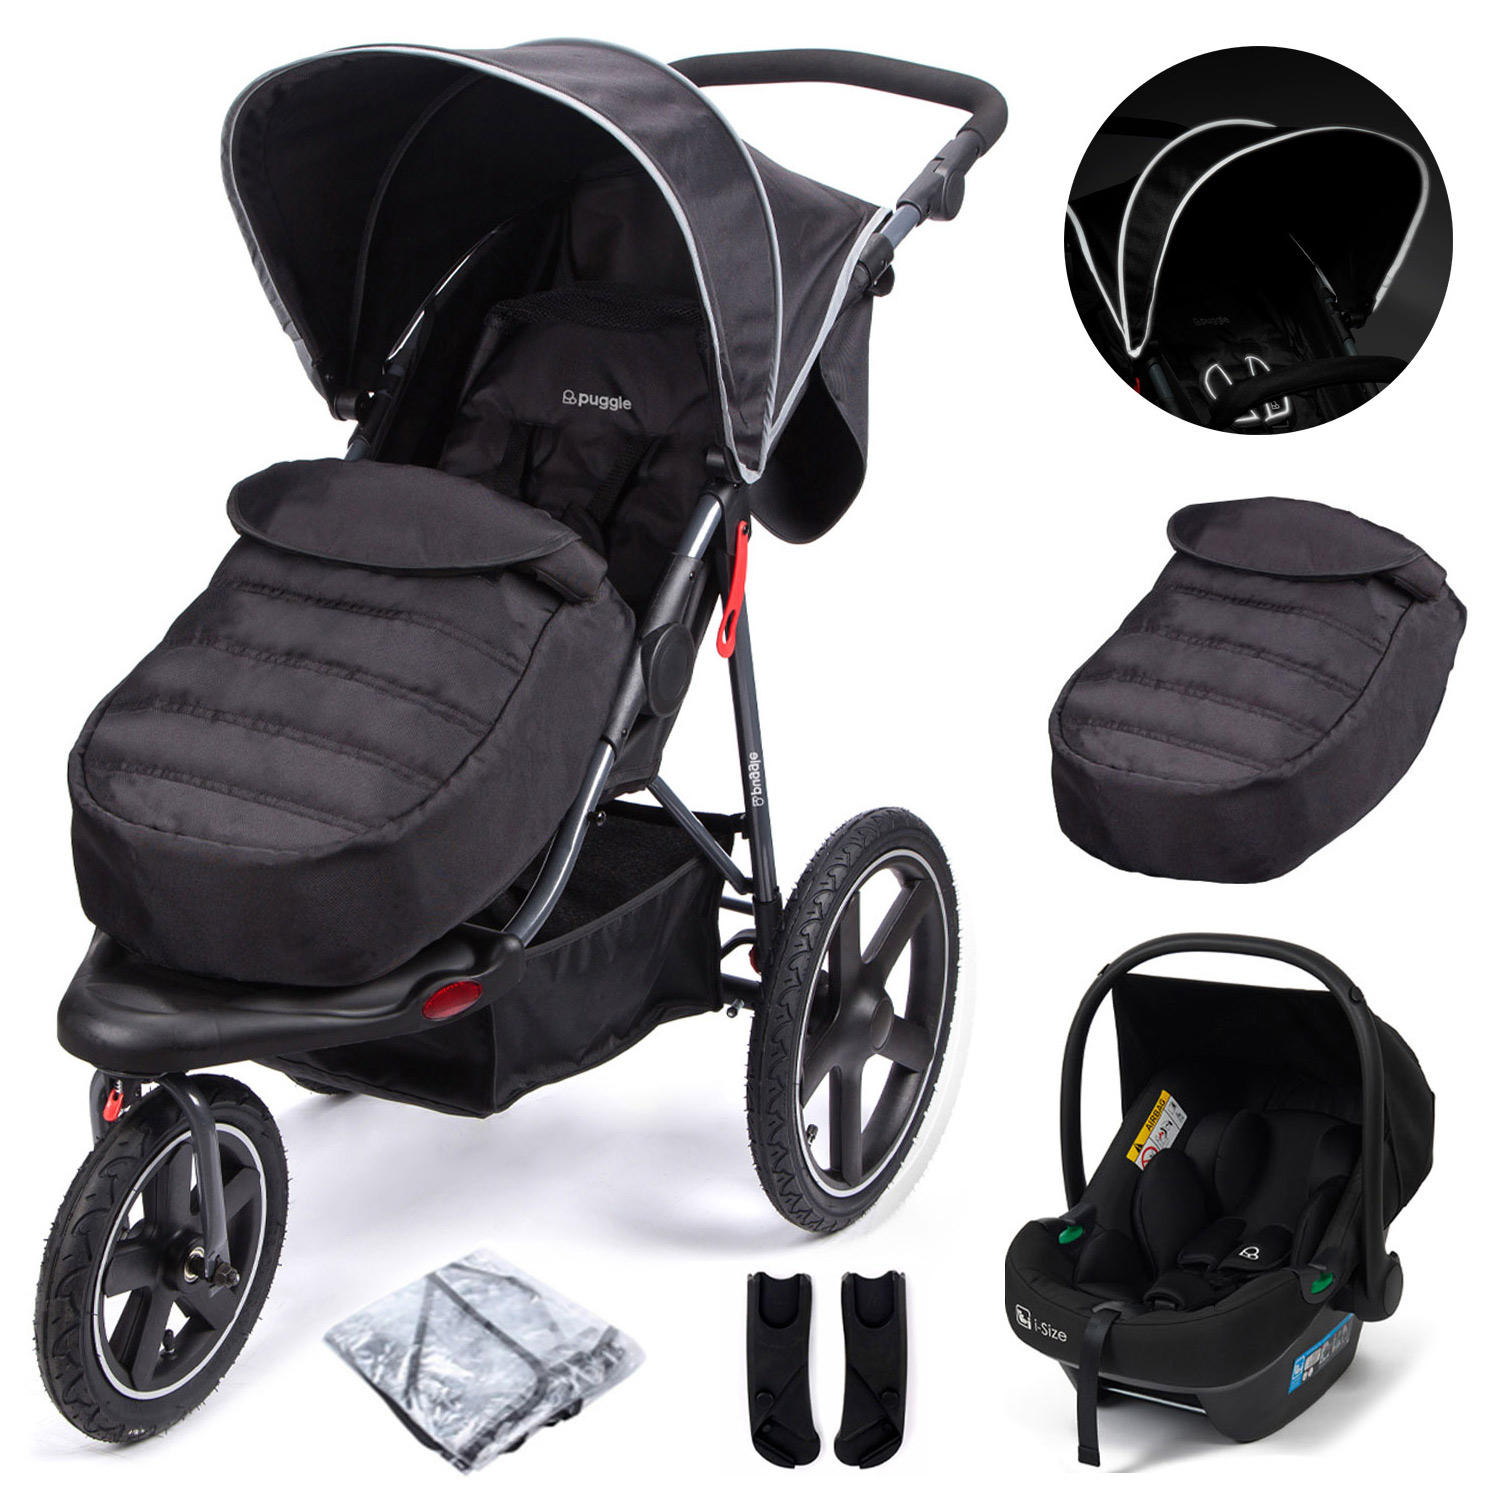 Puggle Urban Terrain Sprint GT Travel System, Adapters & Safe Fit i-Size Car Seat - Storm Black